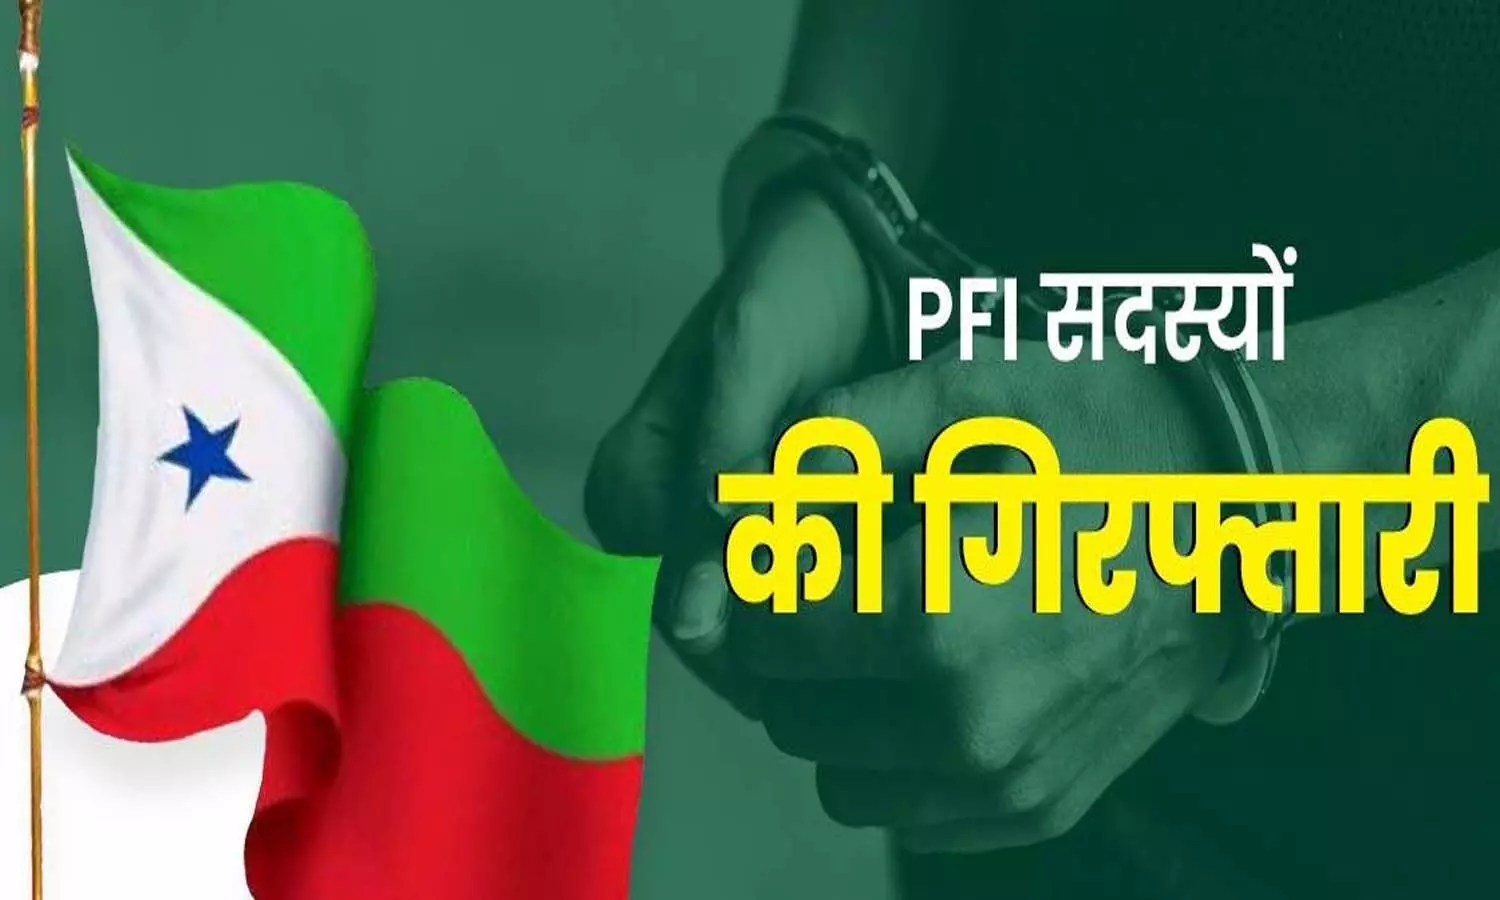 Action against PFI continues, 4 members of PFI organization arrested from Kamrup district of Assam